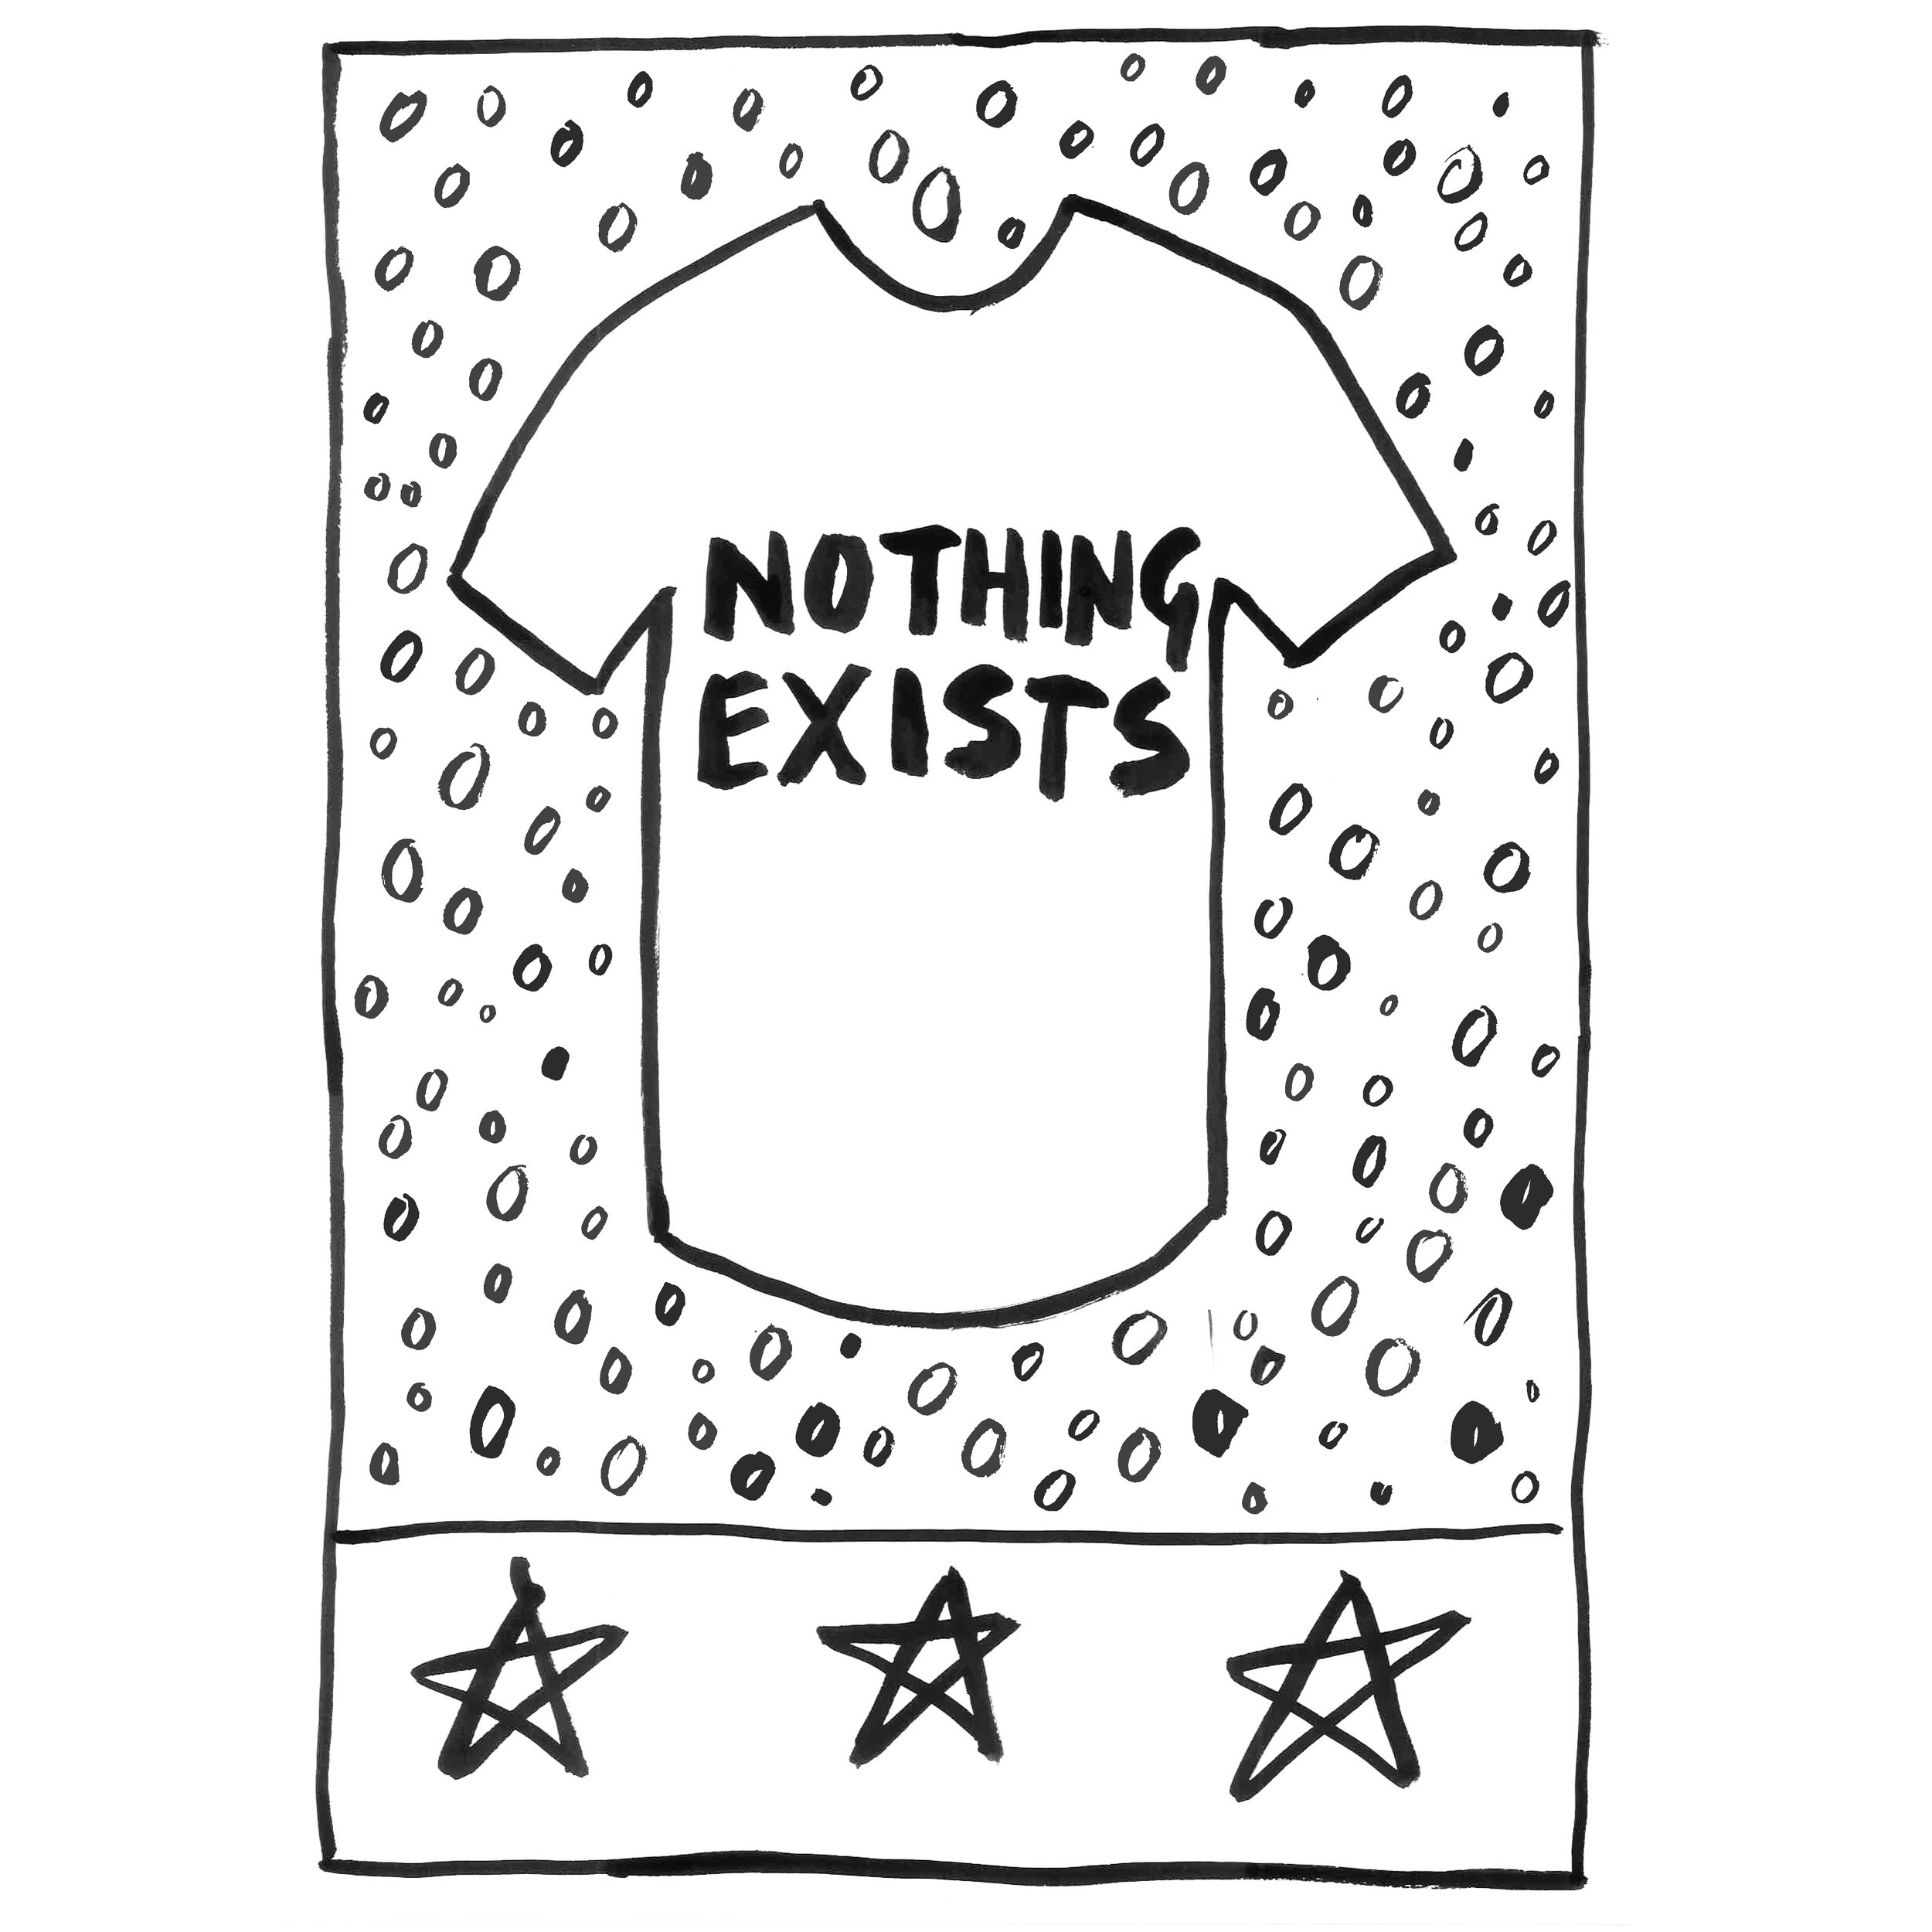 Nothing Exists.jpg